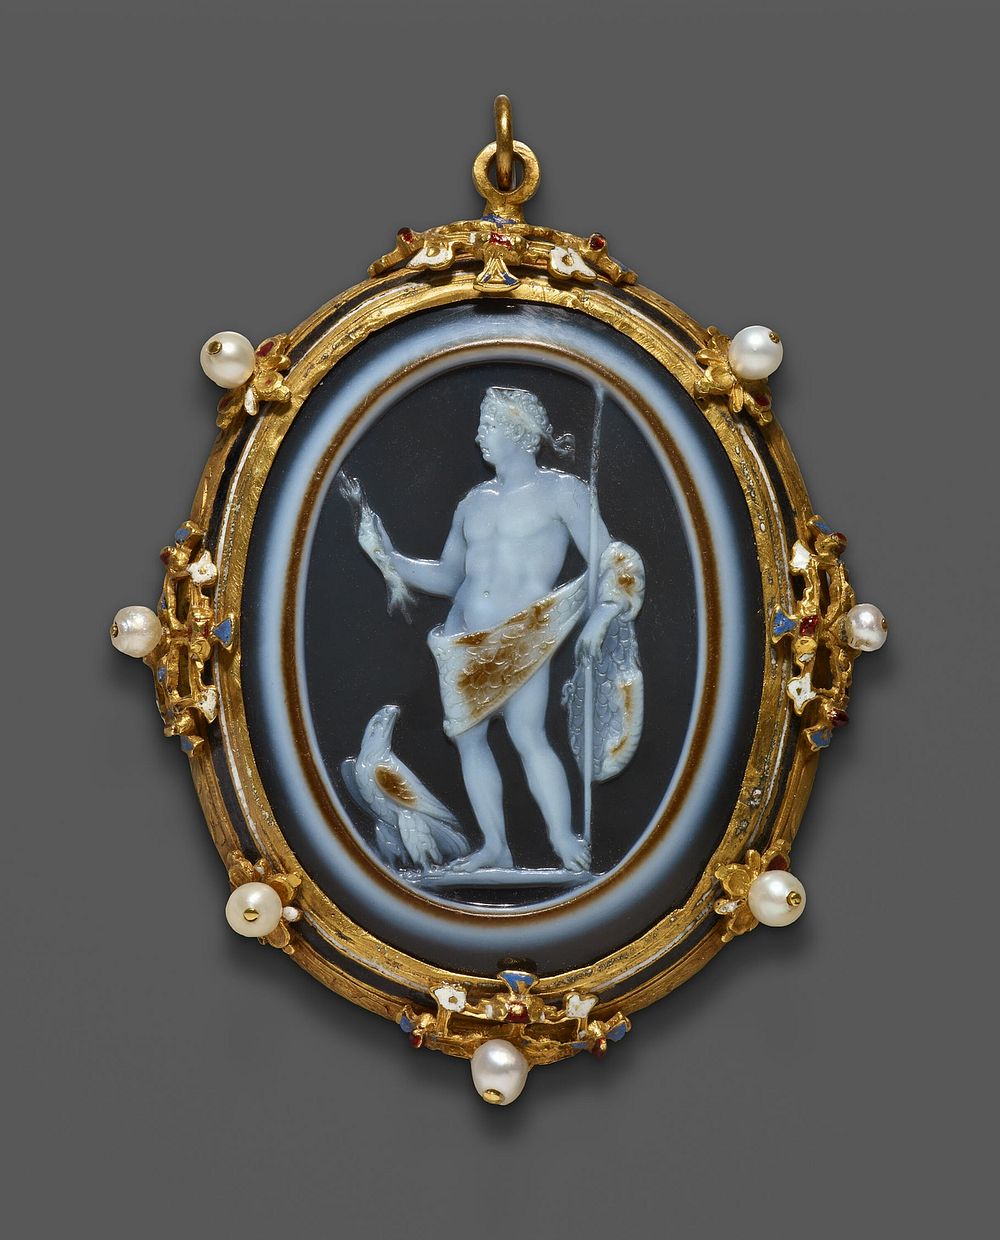 Cameo Portraying Emperor Claudius as Jupiter by Ancient Roman